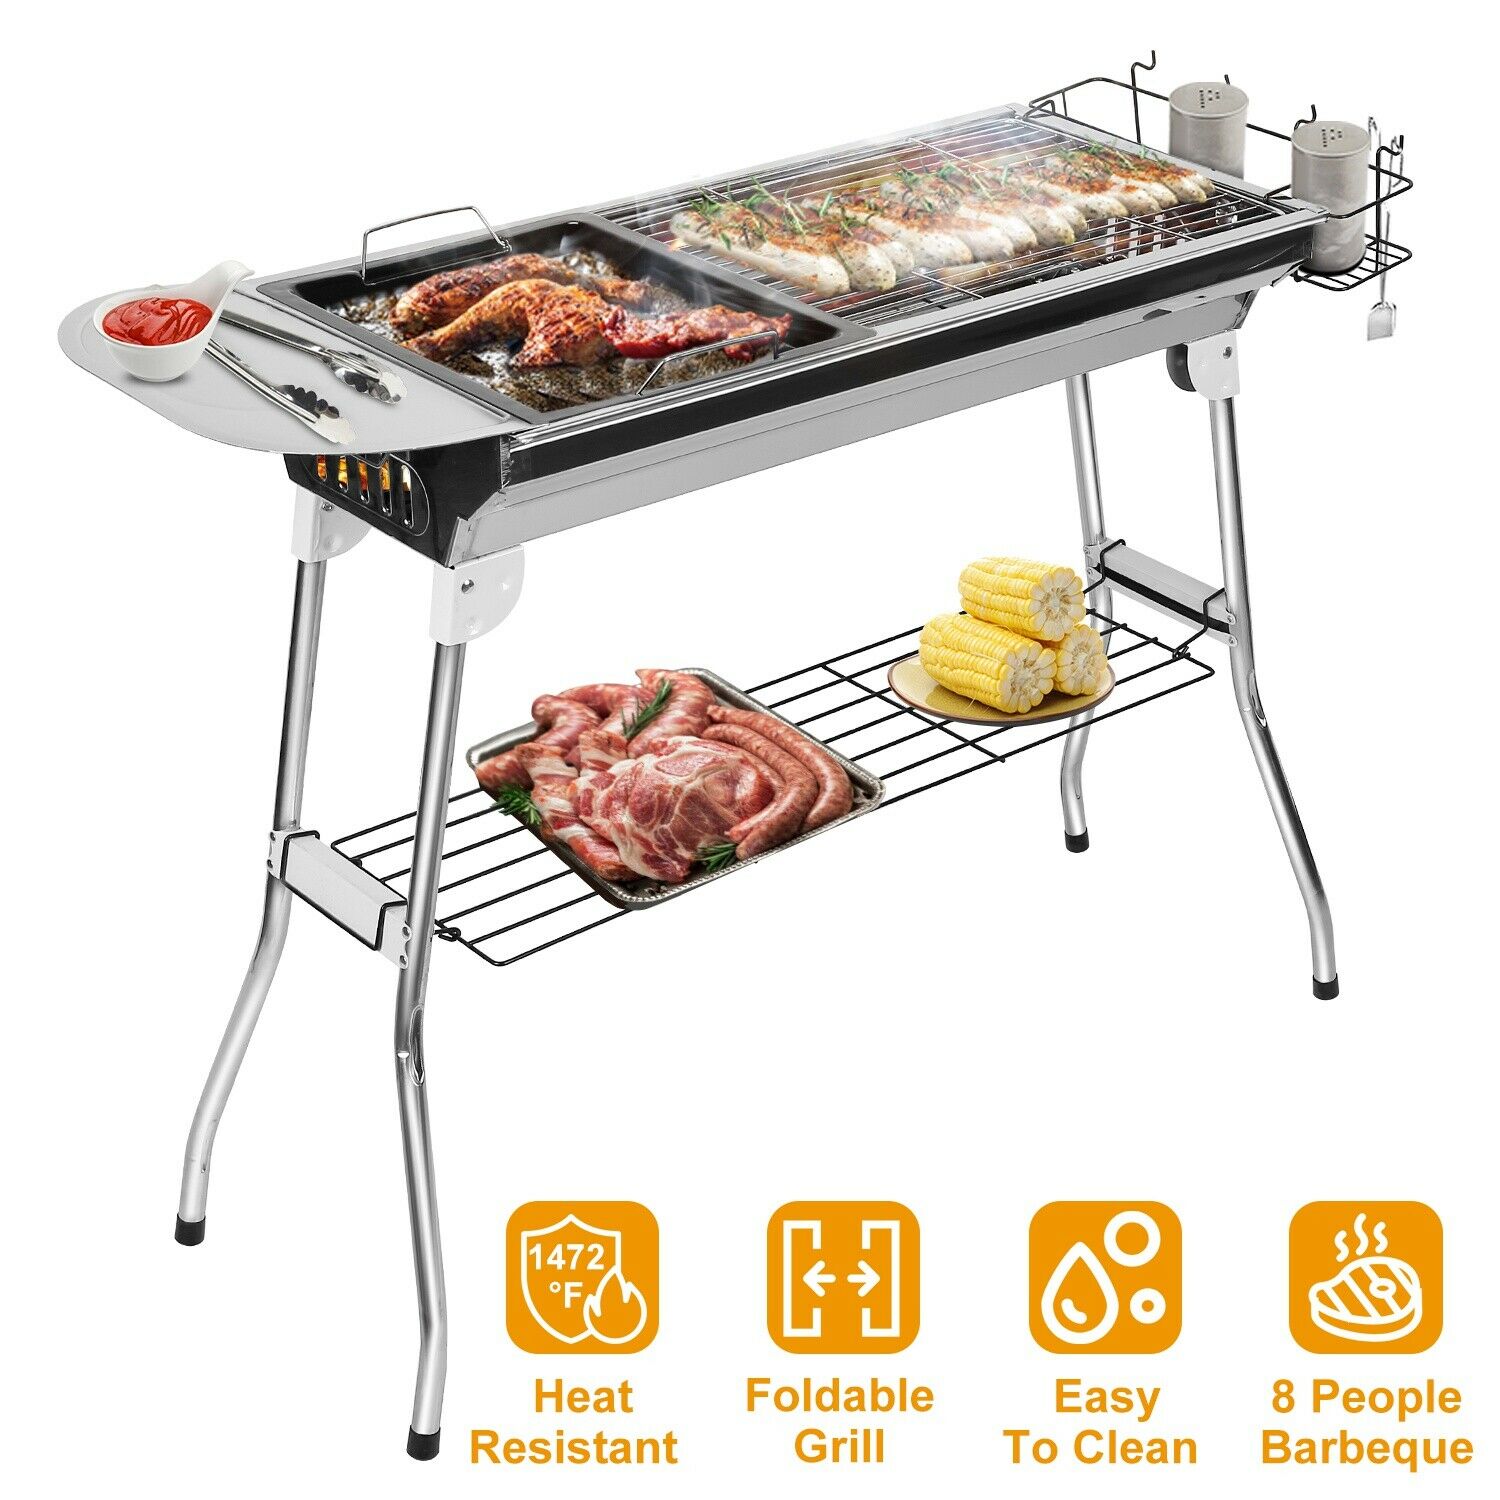 Portable Folding Charcoal BBQ Grill Stainless Steel For Picnic Camping Outdoor